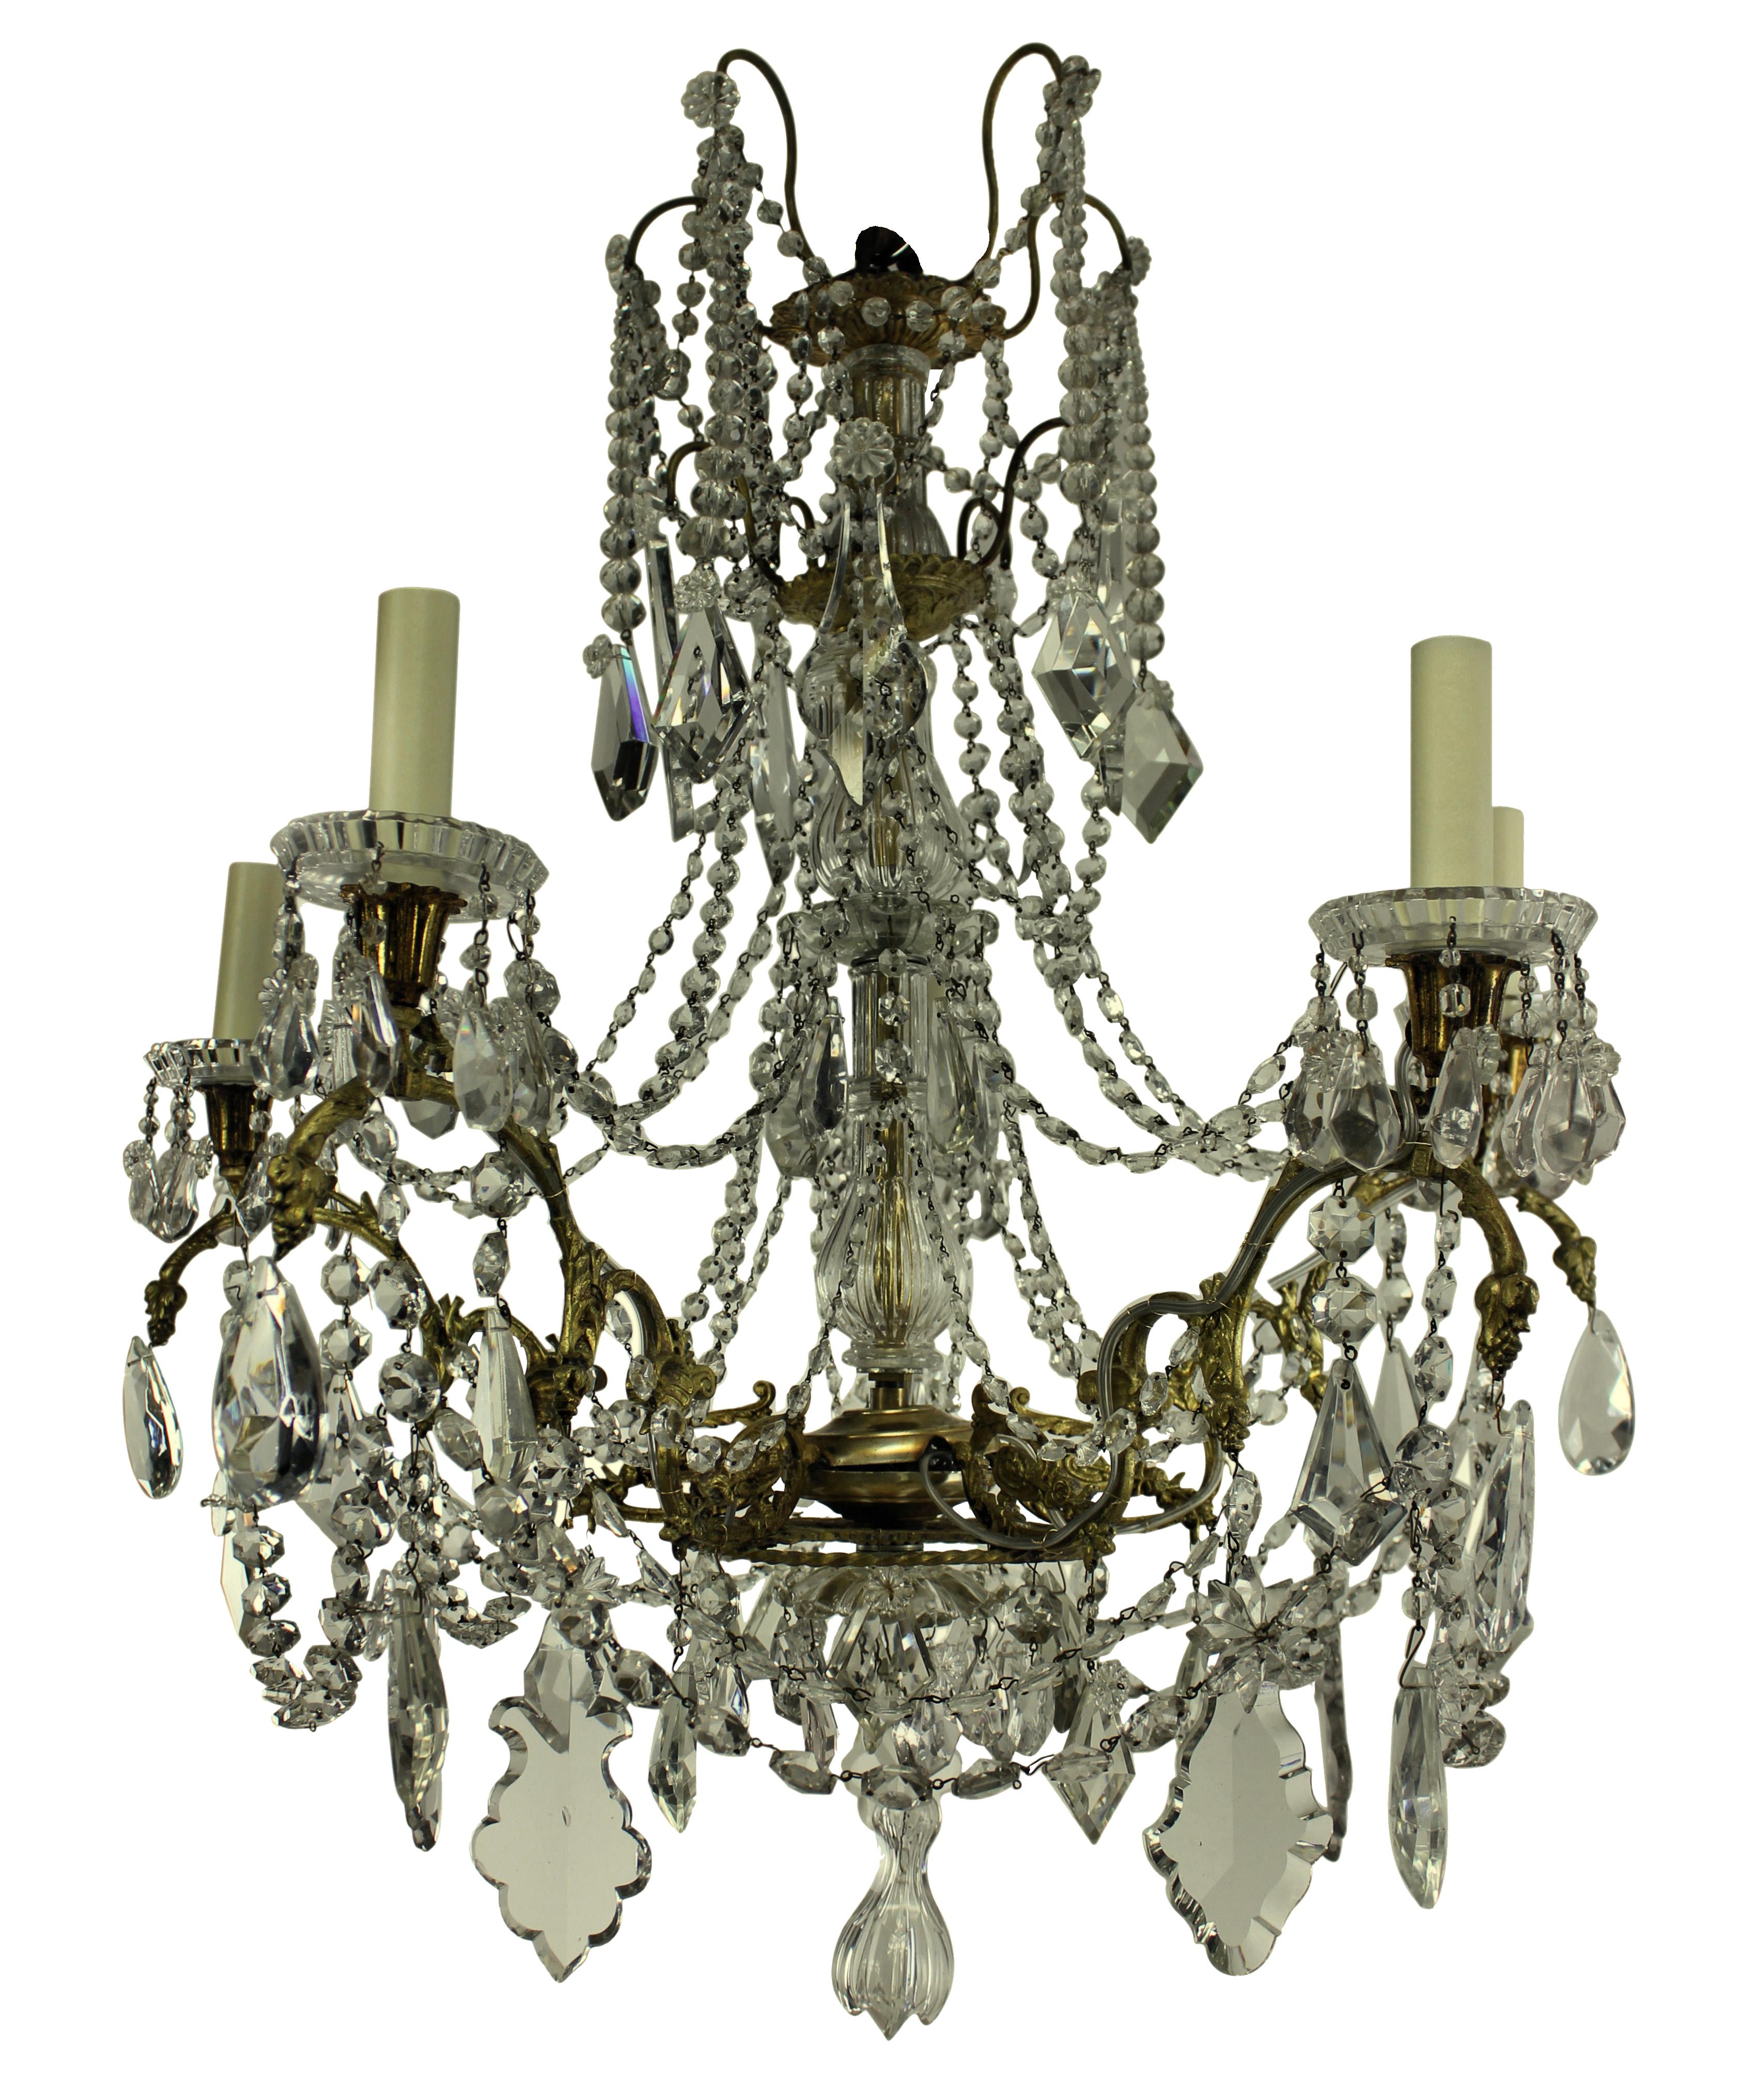 Cut Glass 19th Century Ormolu and Cut-Glass Chandelier, Signed Baccarat